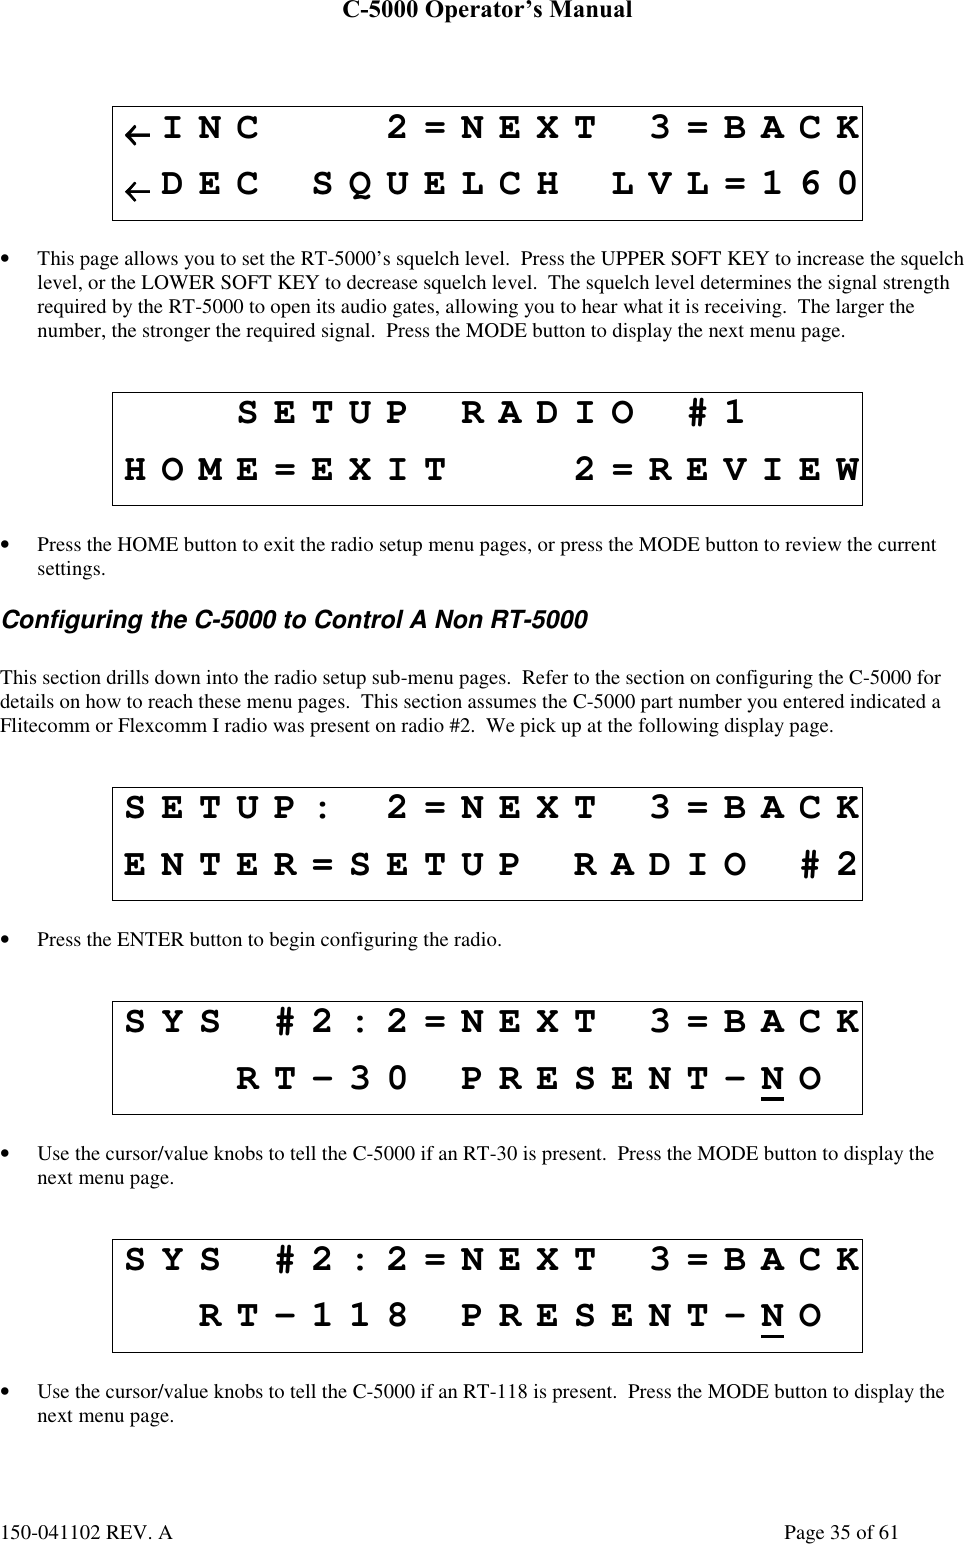 C-5000 Operator’s Manual150-041102 REV. A Page 35 of 61←←←←INC 2=NEXT 3=BACK←←←←DEC SQUELCH LVL=160• This page allows you to set the RT-5000’s squelch level.  Press the UPPER SOFT KEY to increase the squelchlevel, or the LOWER SOFT KEY to decrease squelch level.  The squelch level determines the signal strengthrequired by the RT-5000 to open its audio gates, allowing you to hear what it is receiving.  The larger thenumber, the stronger the required signal.  Press the MODE button to display the next menu page.SETUP RADIO #1HOME=EXIT 2=REVIEW• Press the HOME button to exit the radio setup menu pages, or press the MODE button to review the currentsettings.Configuring the C-5000 to Control A Non RT-5000This section drills down into the radio setup sub-menu pages.  Refer to the section on configuring the C-5000 fordetails on how to reach these menu pages.  This section assumes the C-5000 part number you entered indicated aFlitecomm or Flexcomm I radio was present on radio #2.  We pick up at the following display page.SETUP: 2=NEXT 3=BACKENTER=SETUP RADIO #2• Press the ENTER button to begin configuring the radio.SYS #2:2=NEXT 3=BACKRT-30 PRESENT-NO• Use the cursor/value knobs to tell the C-5000 if an RT-30 is present.  Press the MODE button to display thenext menu page.SYS #2:2=NEXT 3=BACKRT-118 PRESENT-NO• Use the cursor/value knobs to tell the C-5000 if an RT-118 is present.  Press the MODE button to display thenext menu page.